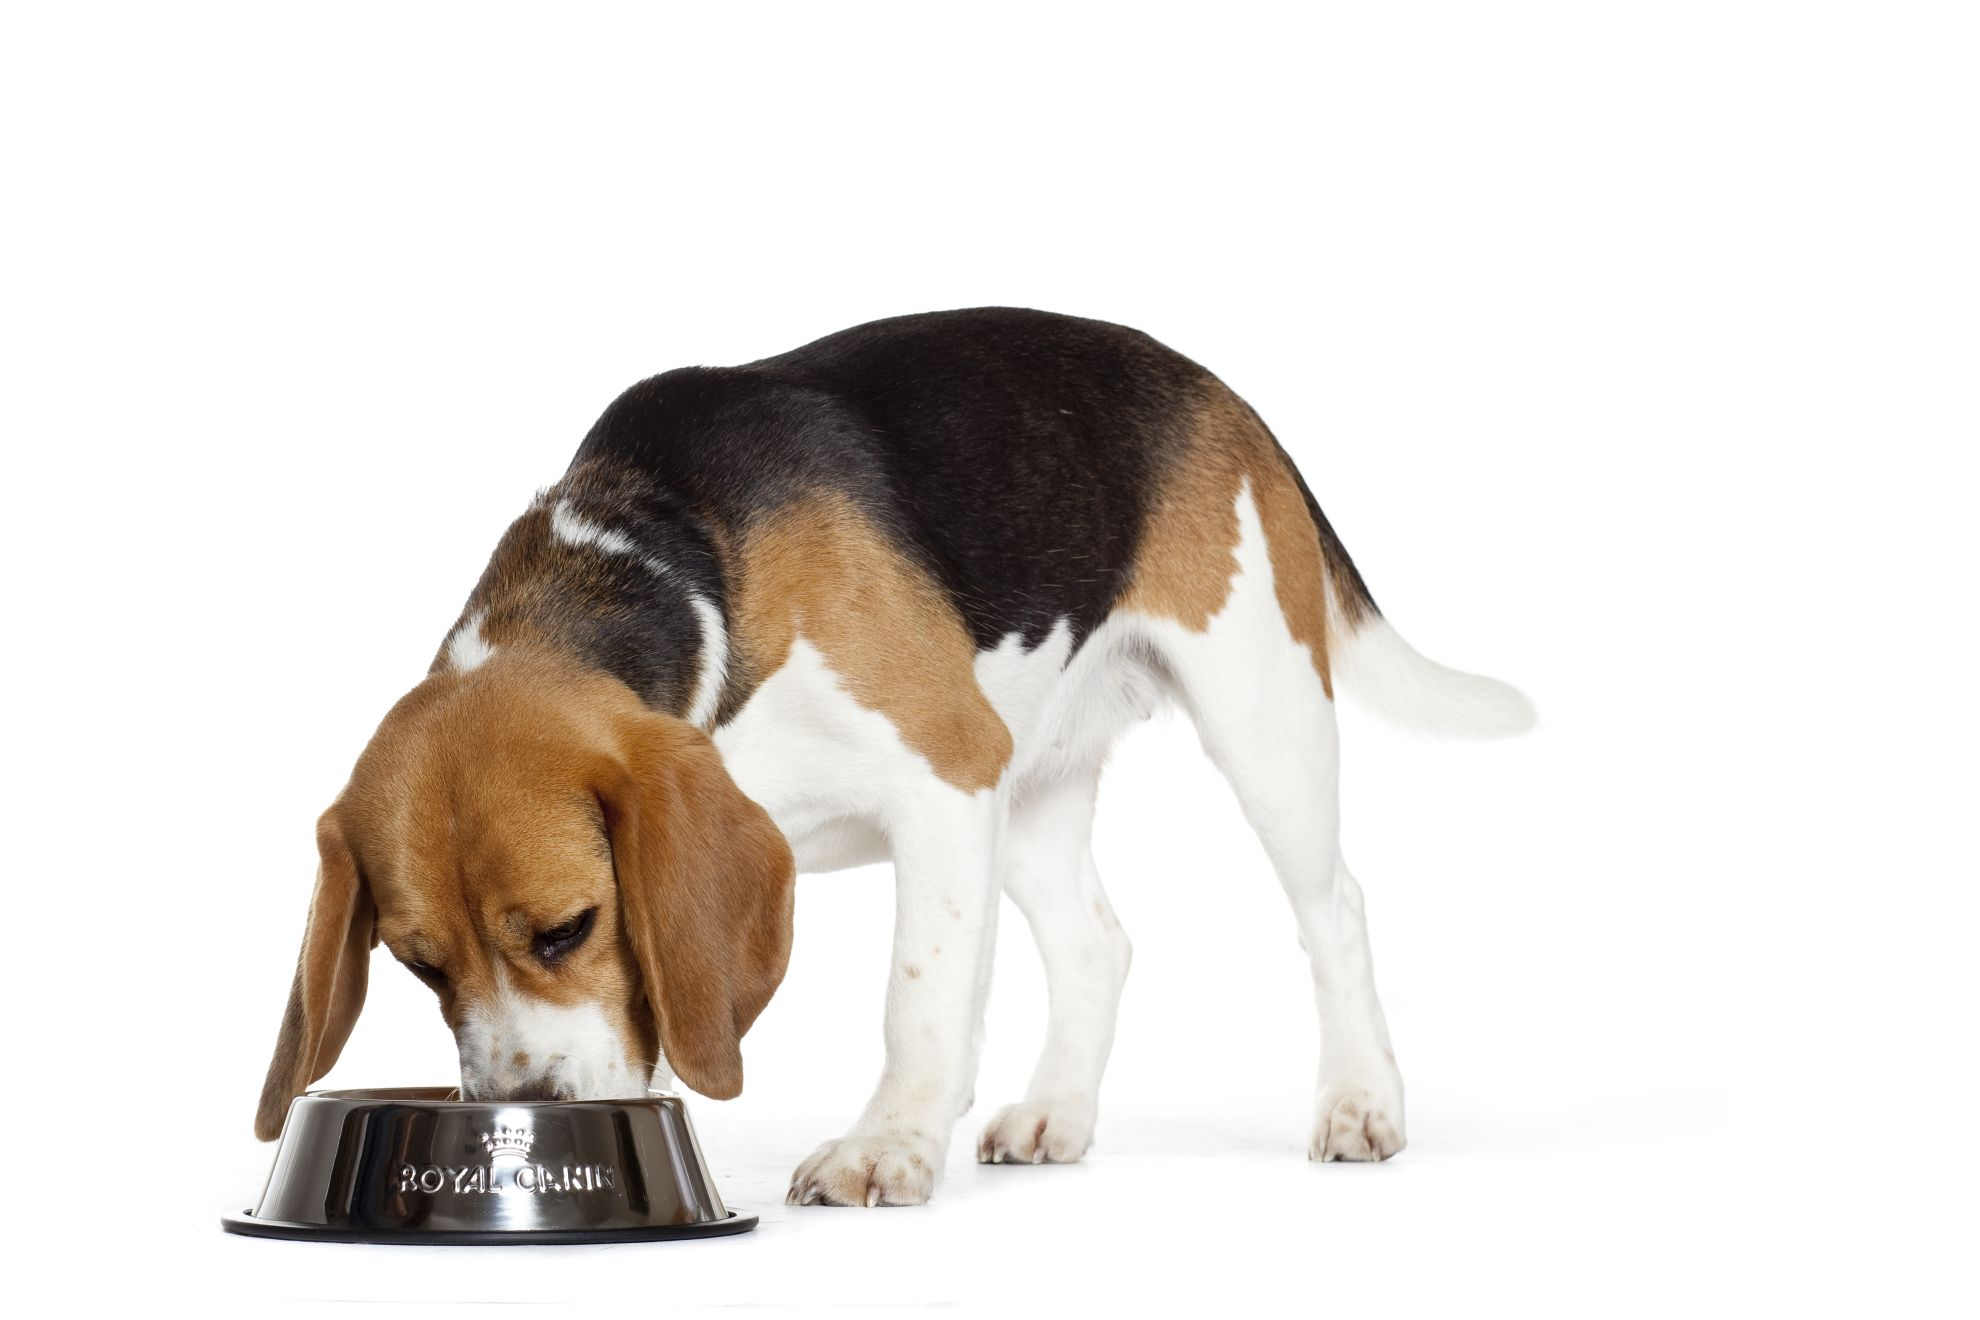 Beagle eating from a metal bowl